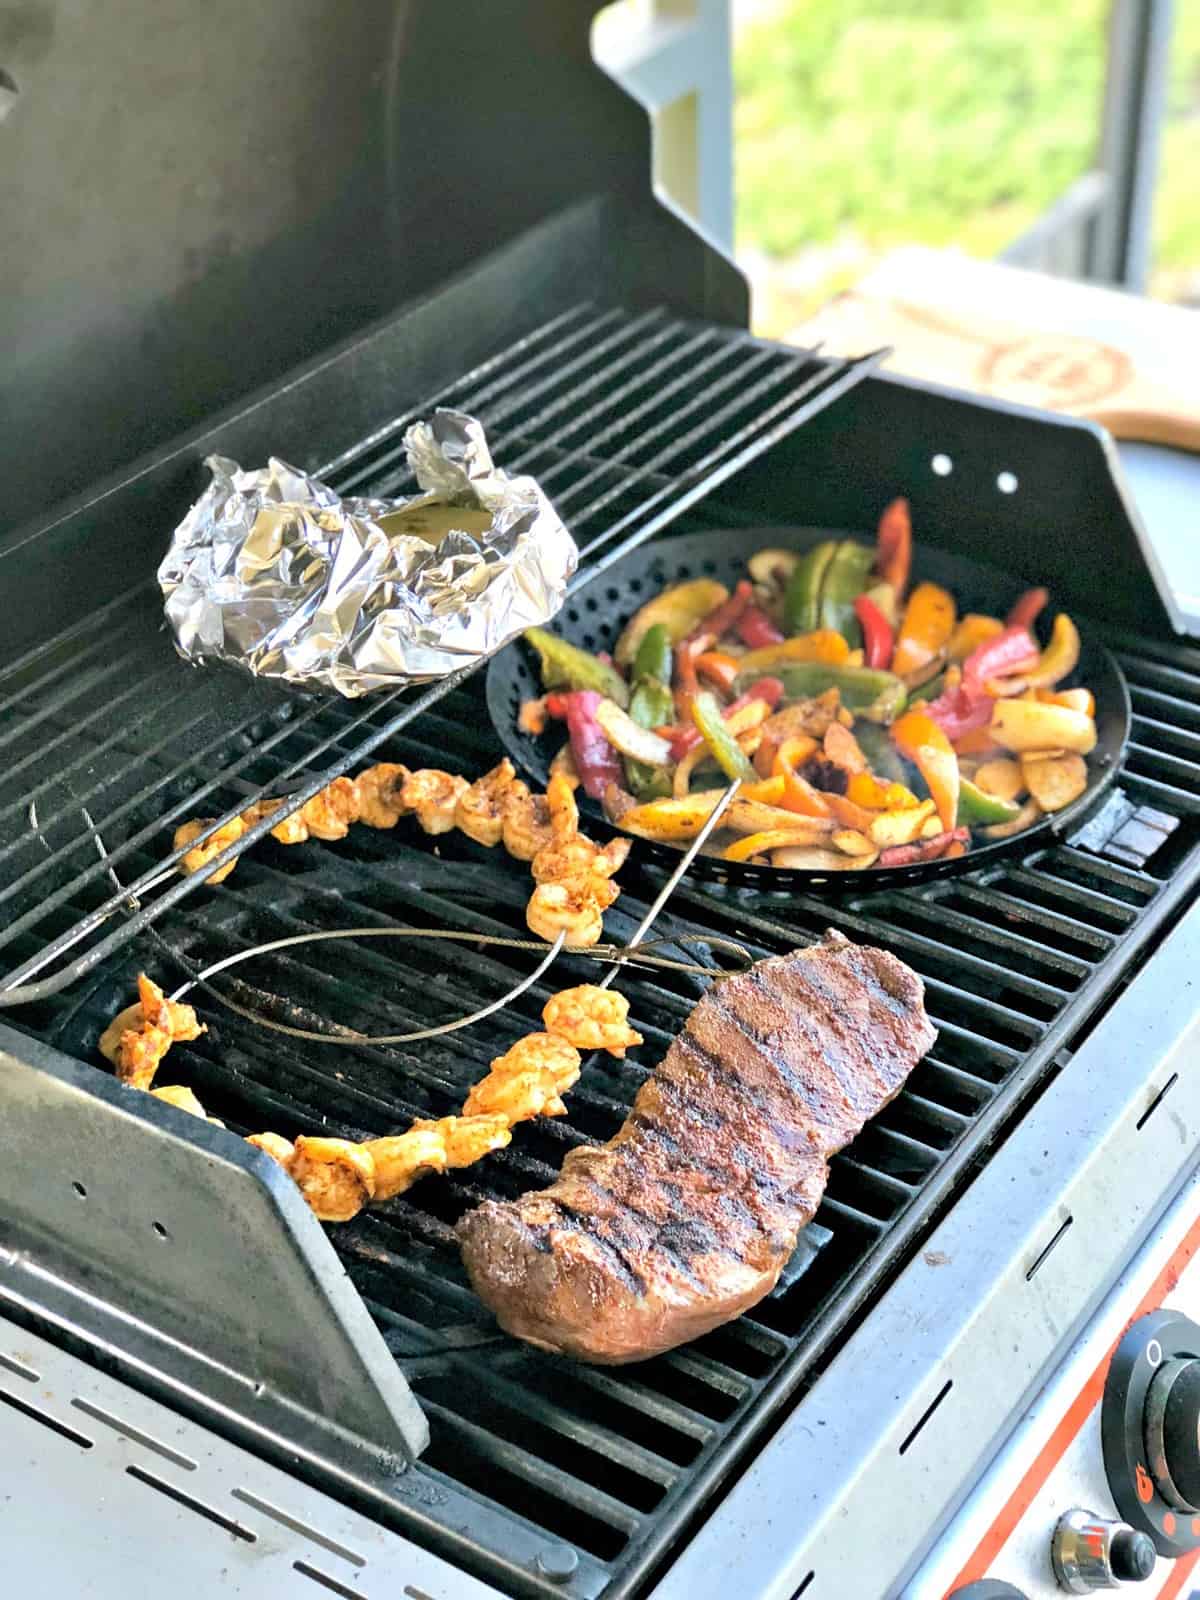 steak, skewered shrimp, bell peppers, and foil packet on grill.